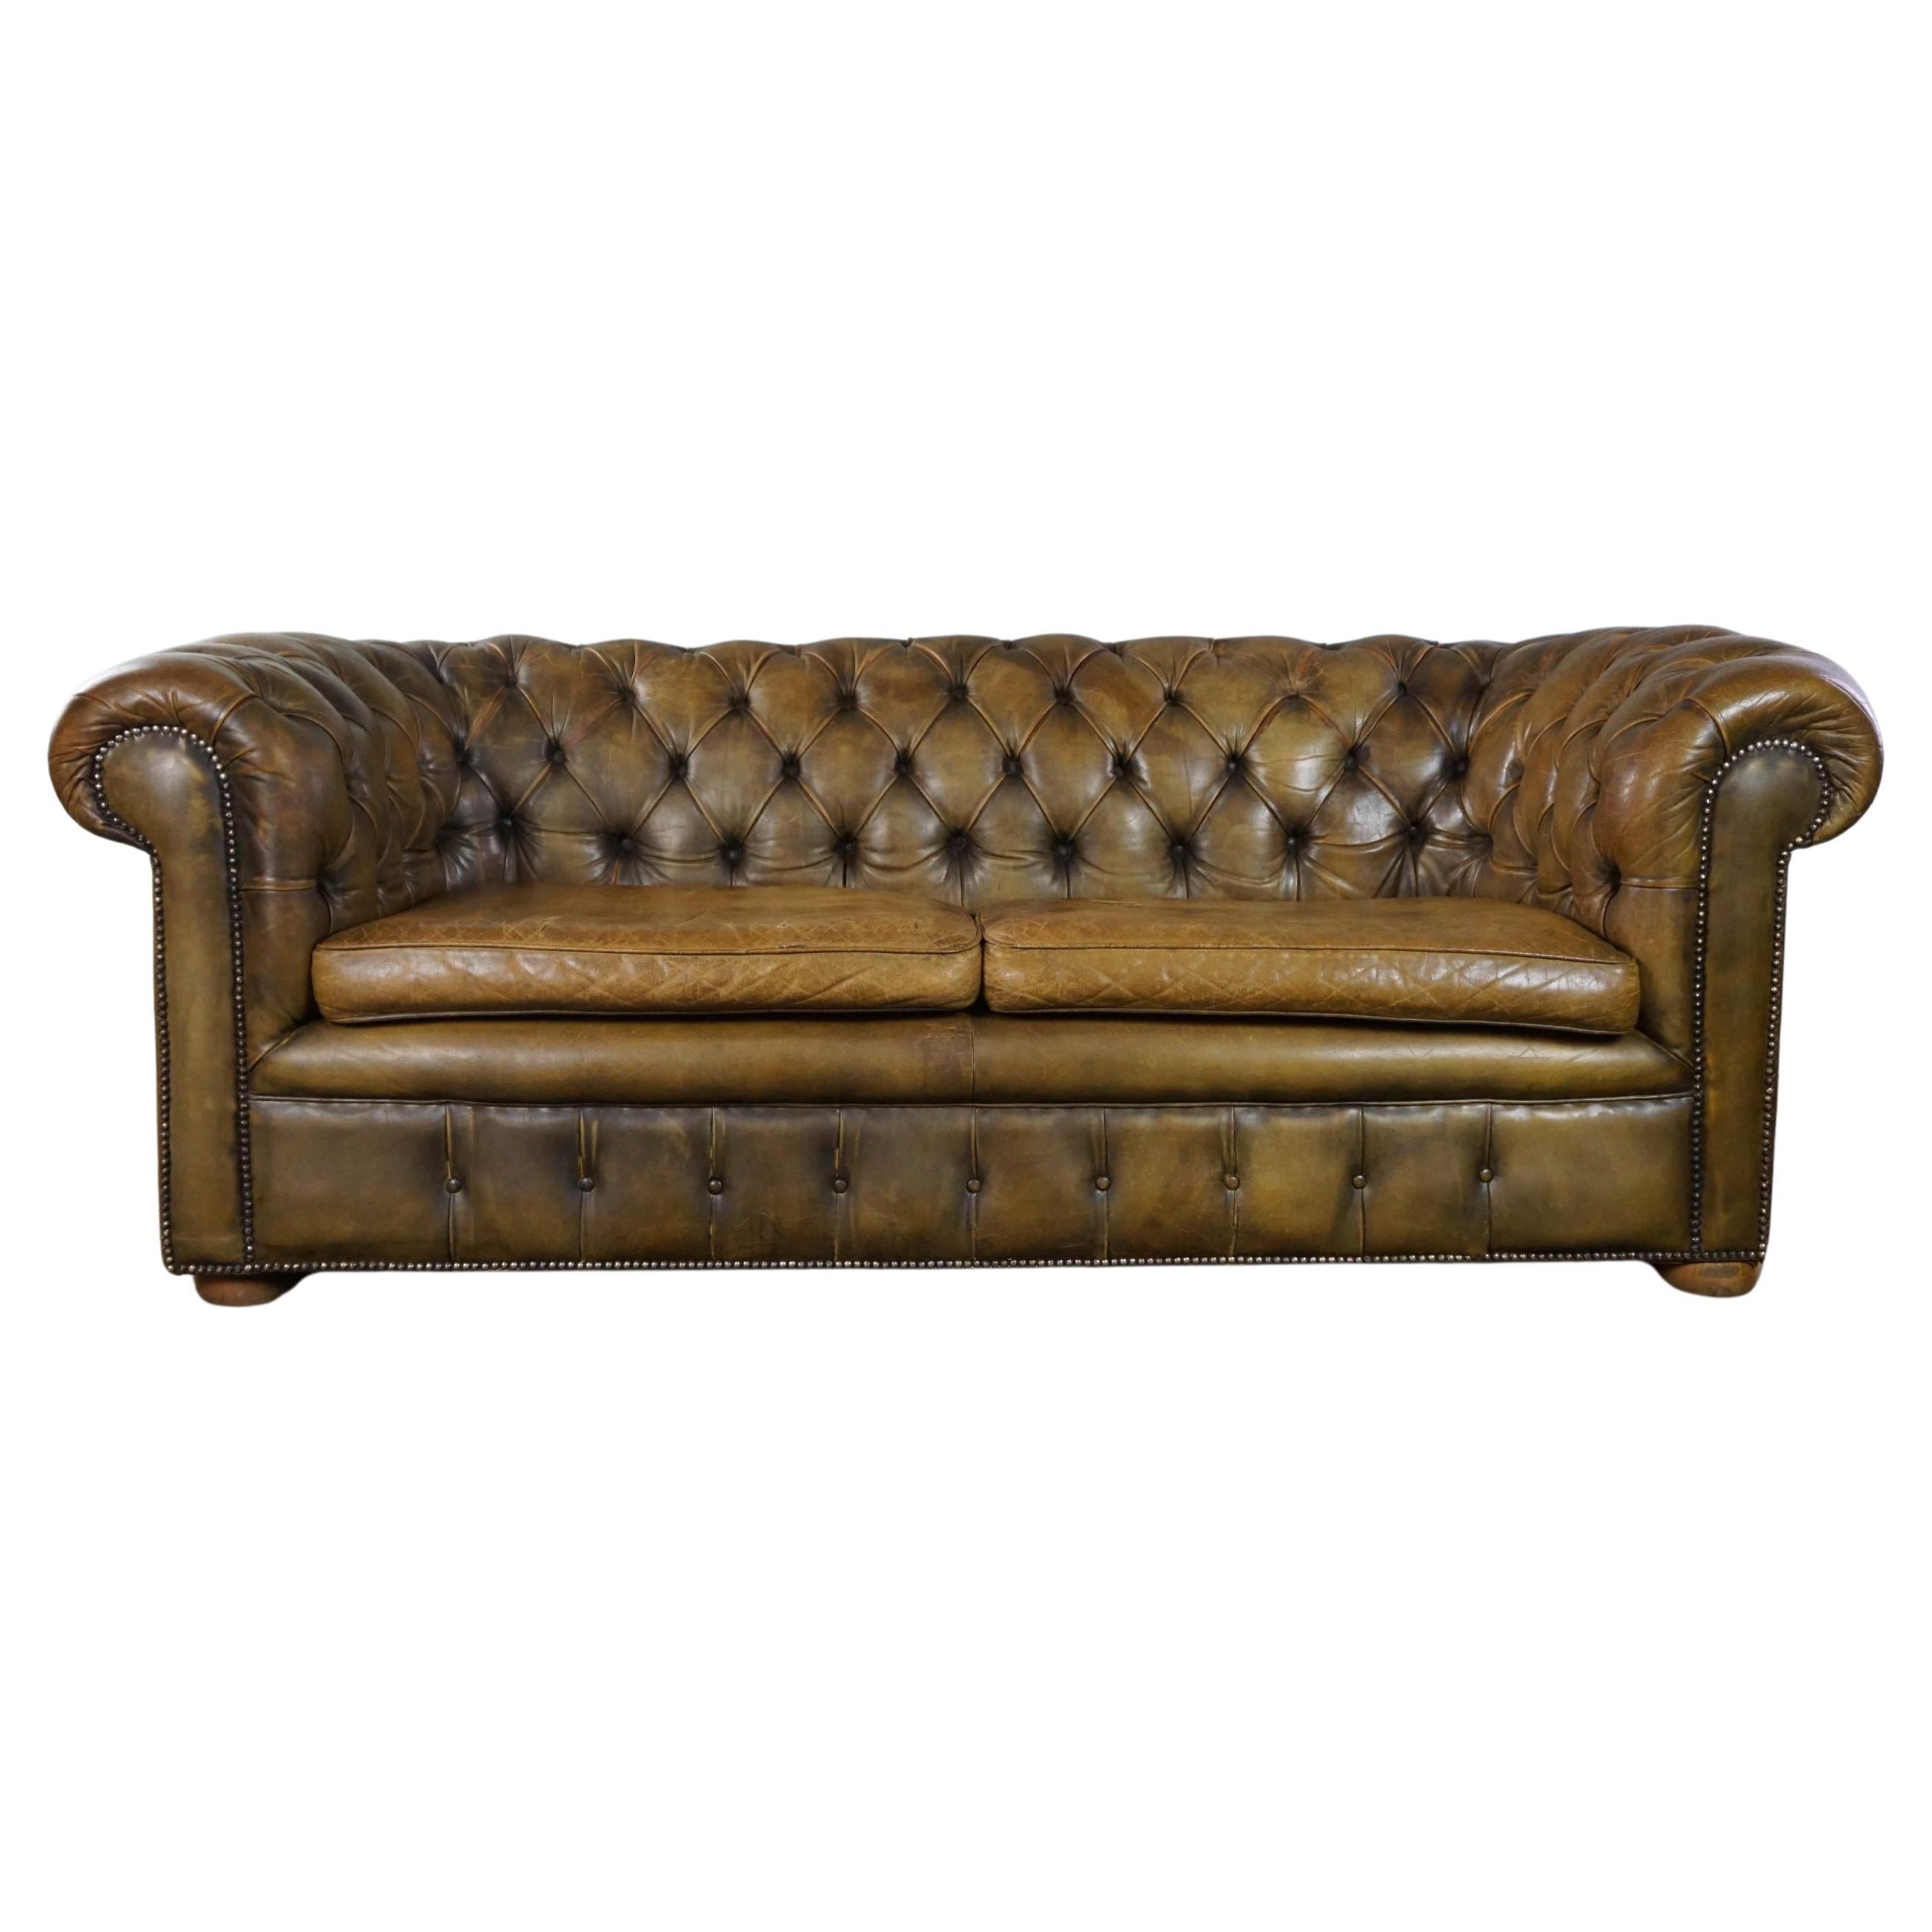 Super sturdy 2.5-seater chesterfield sofa in a beautiful moss green color